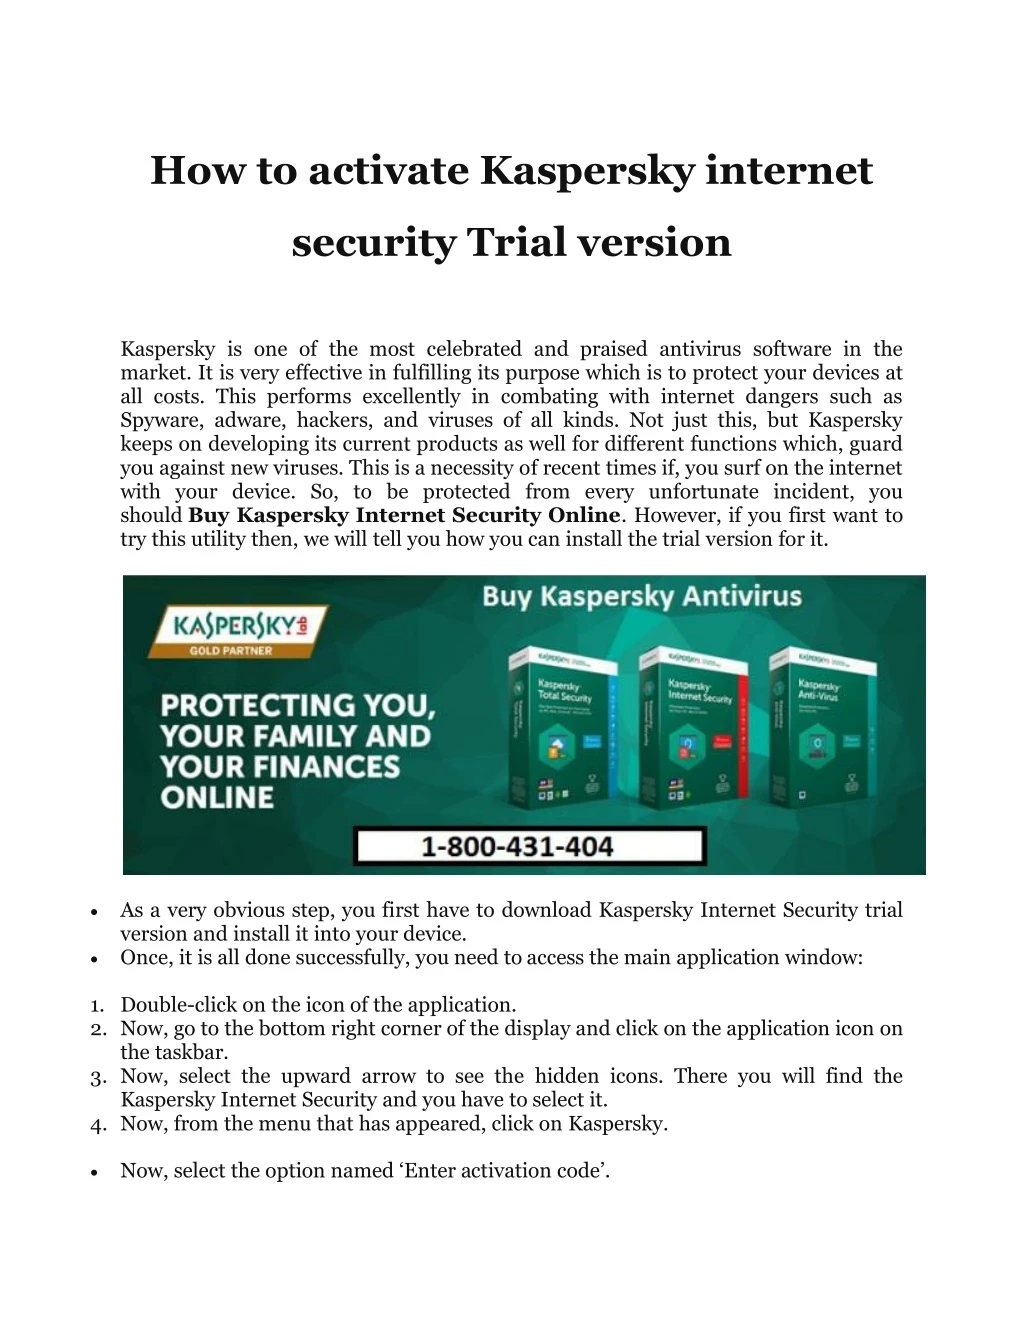 how to activate kaspersky internet